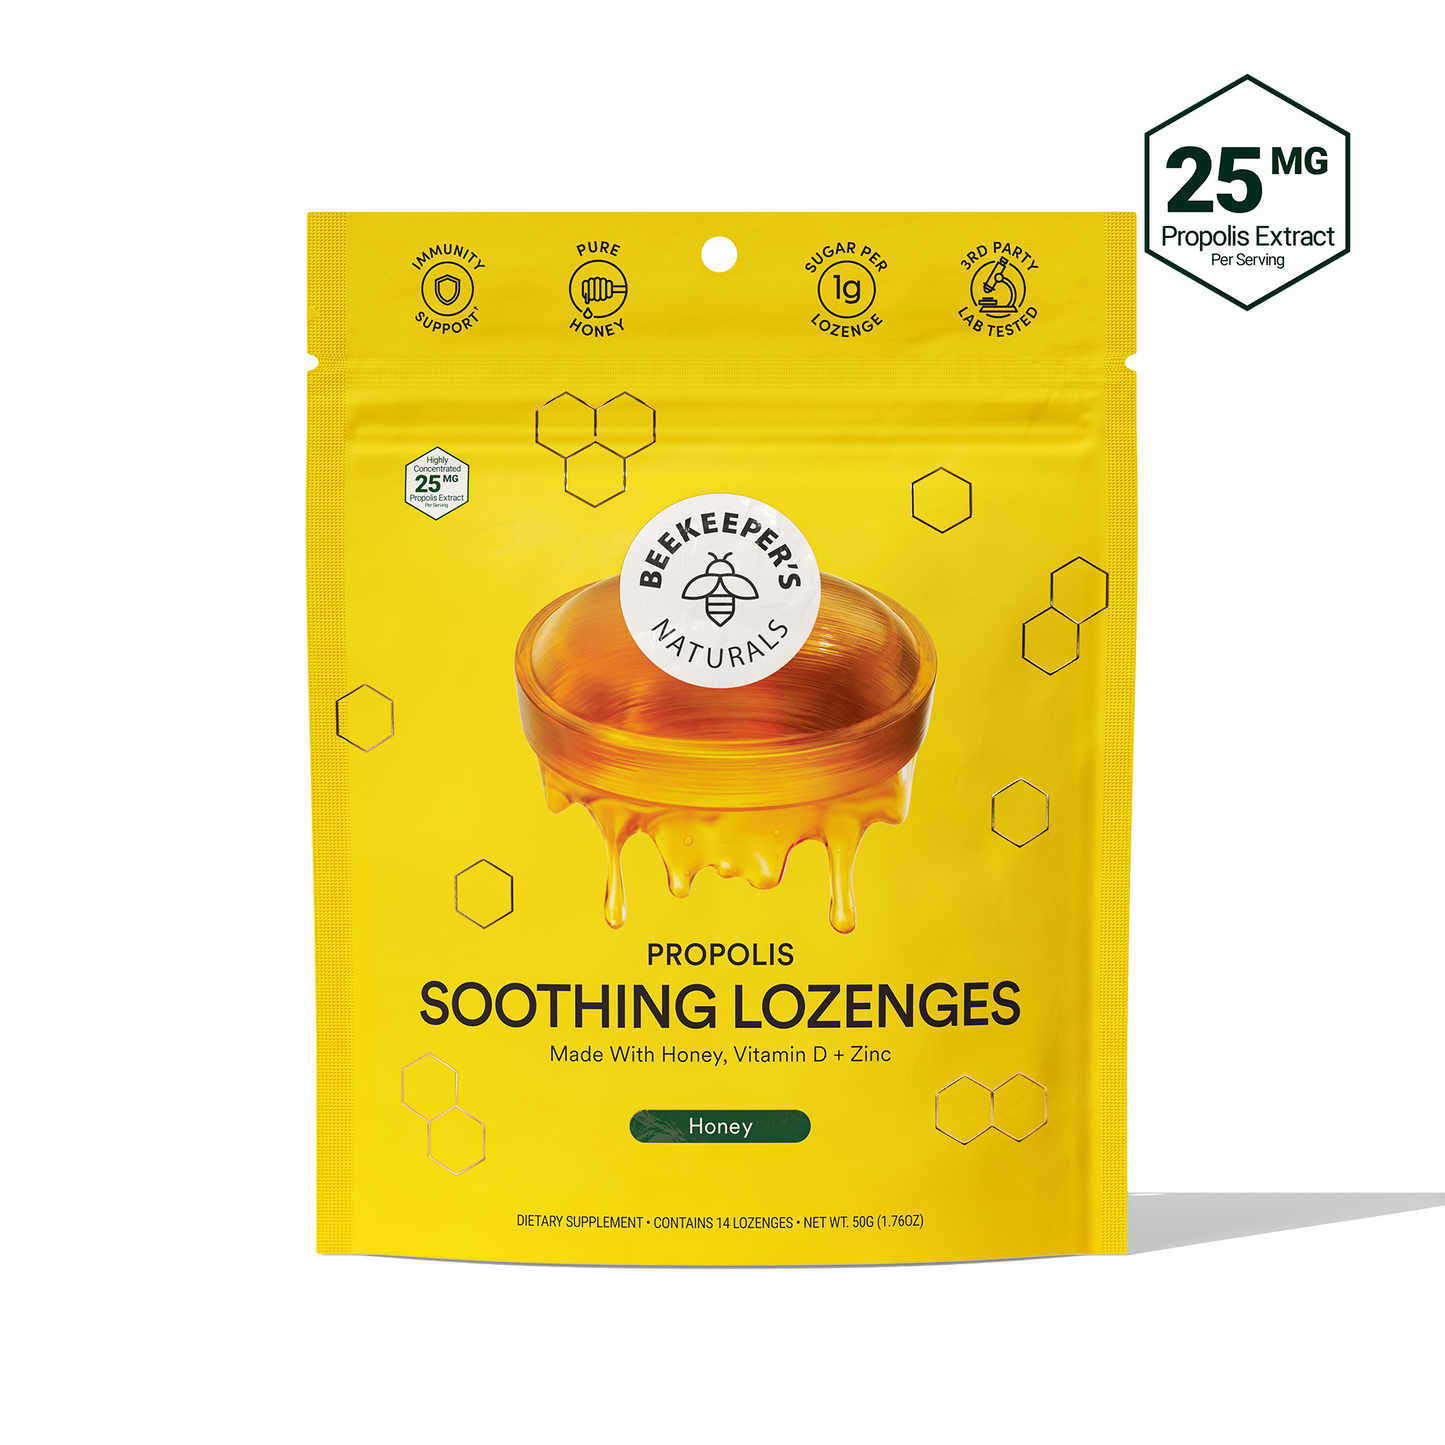 Soothing Lozenges